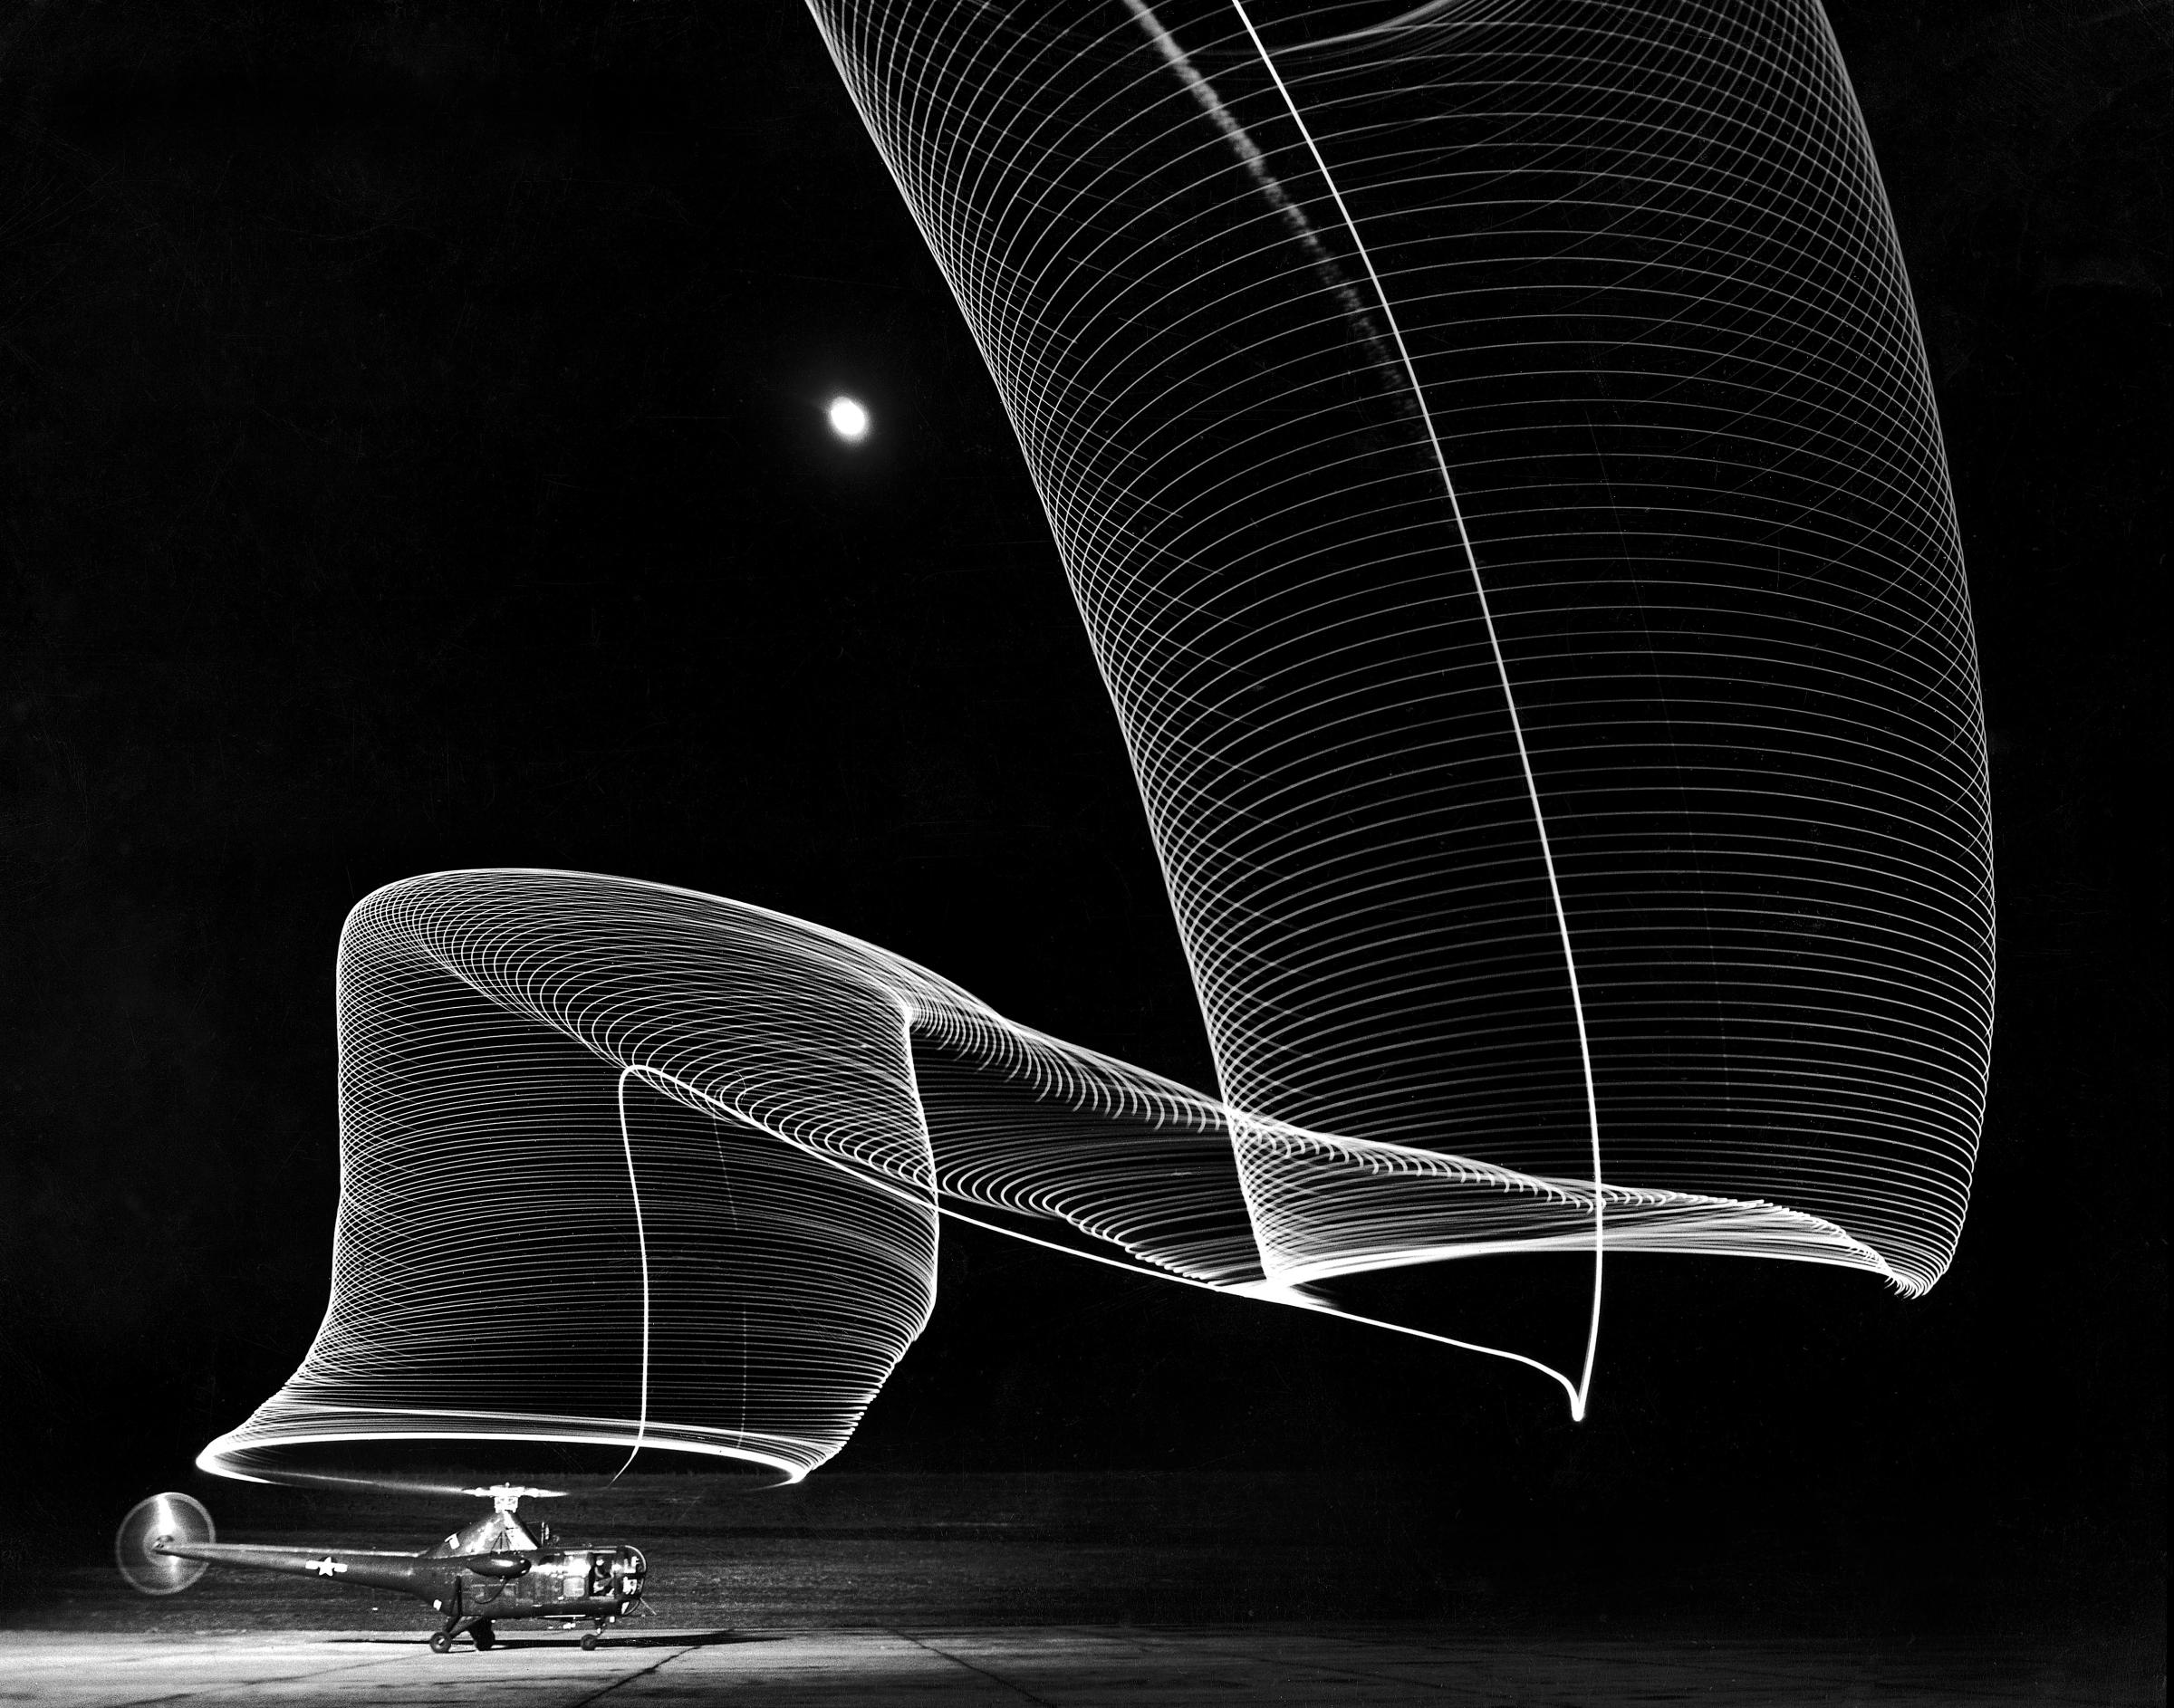 A long exposure view of a Sikorsky S-51 helicopter on the ground at Anacostia Naval Air Station in Washington, DC in 1949. The striking "Slinky shape" is produced by light reflecting on the rotor blades and leaving a trail in the night sky.